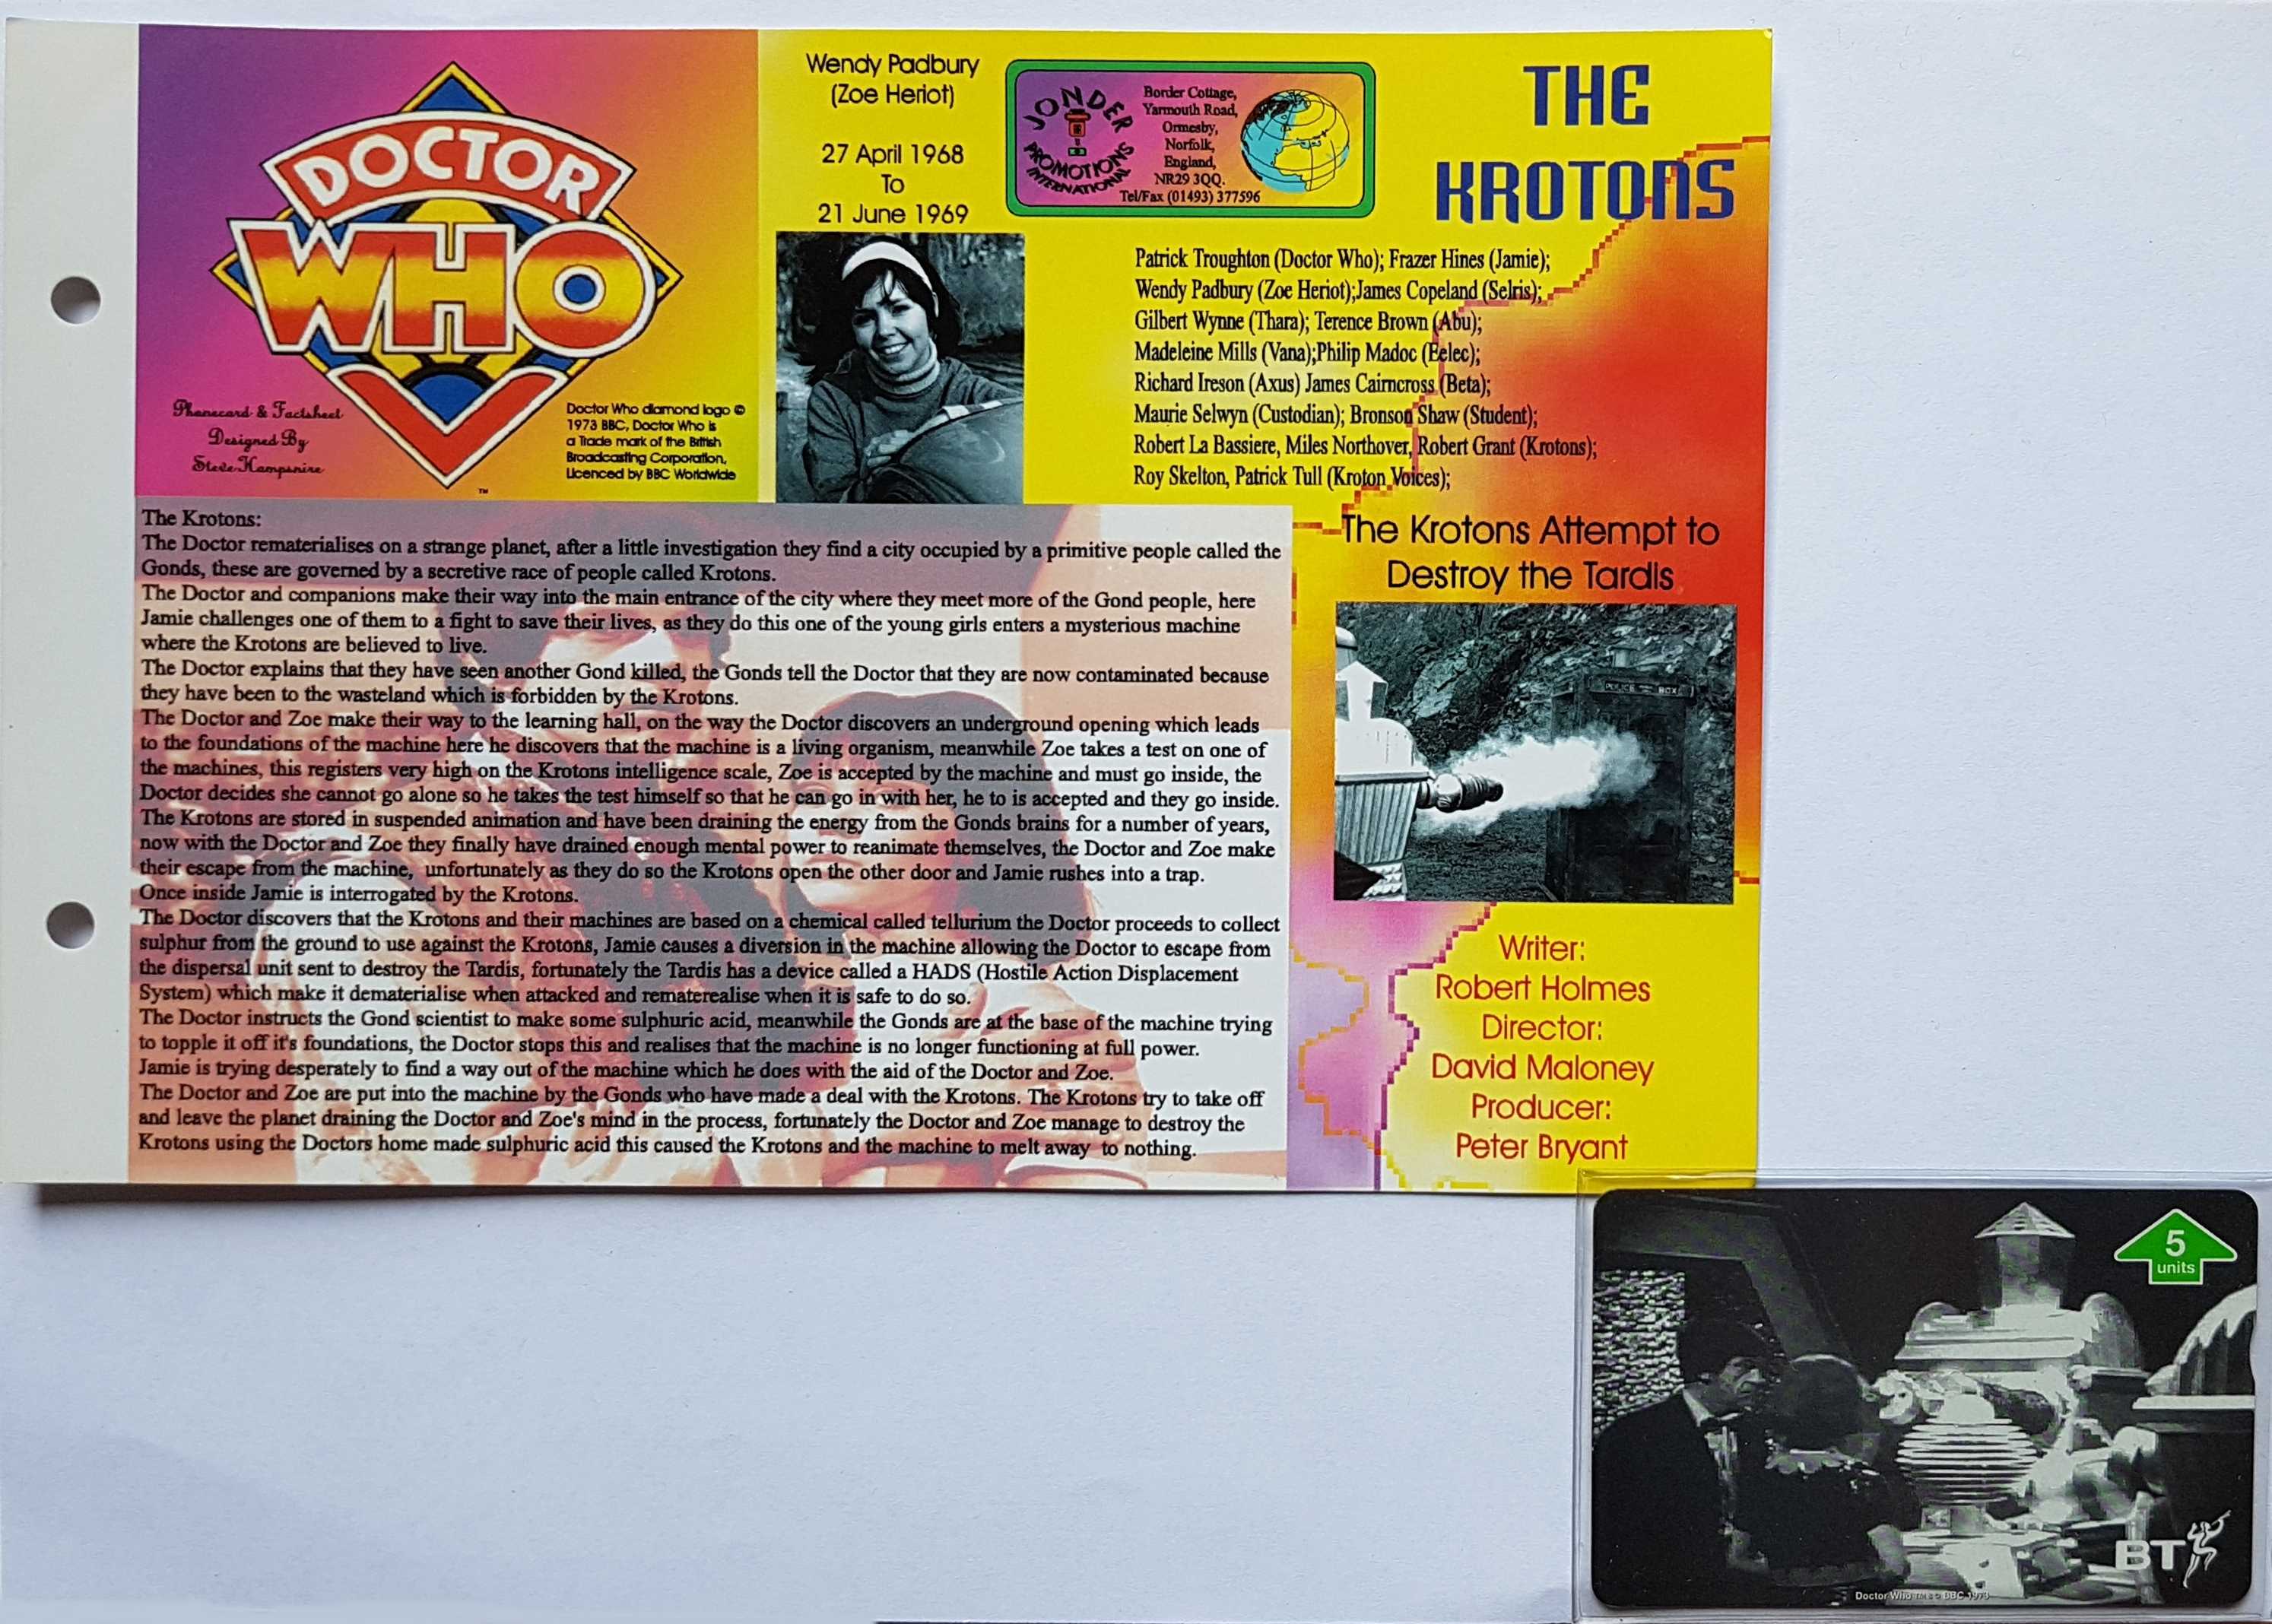 Picture of Doctor Who - The Krotons - Phone card by artist  from the BBC anything_else - Records and Tapes library